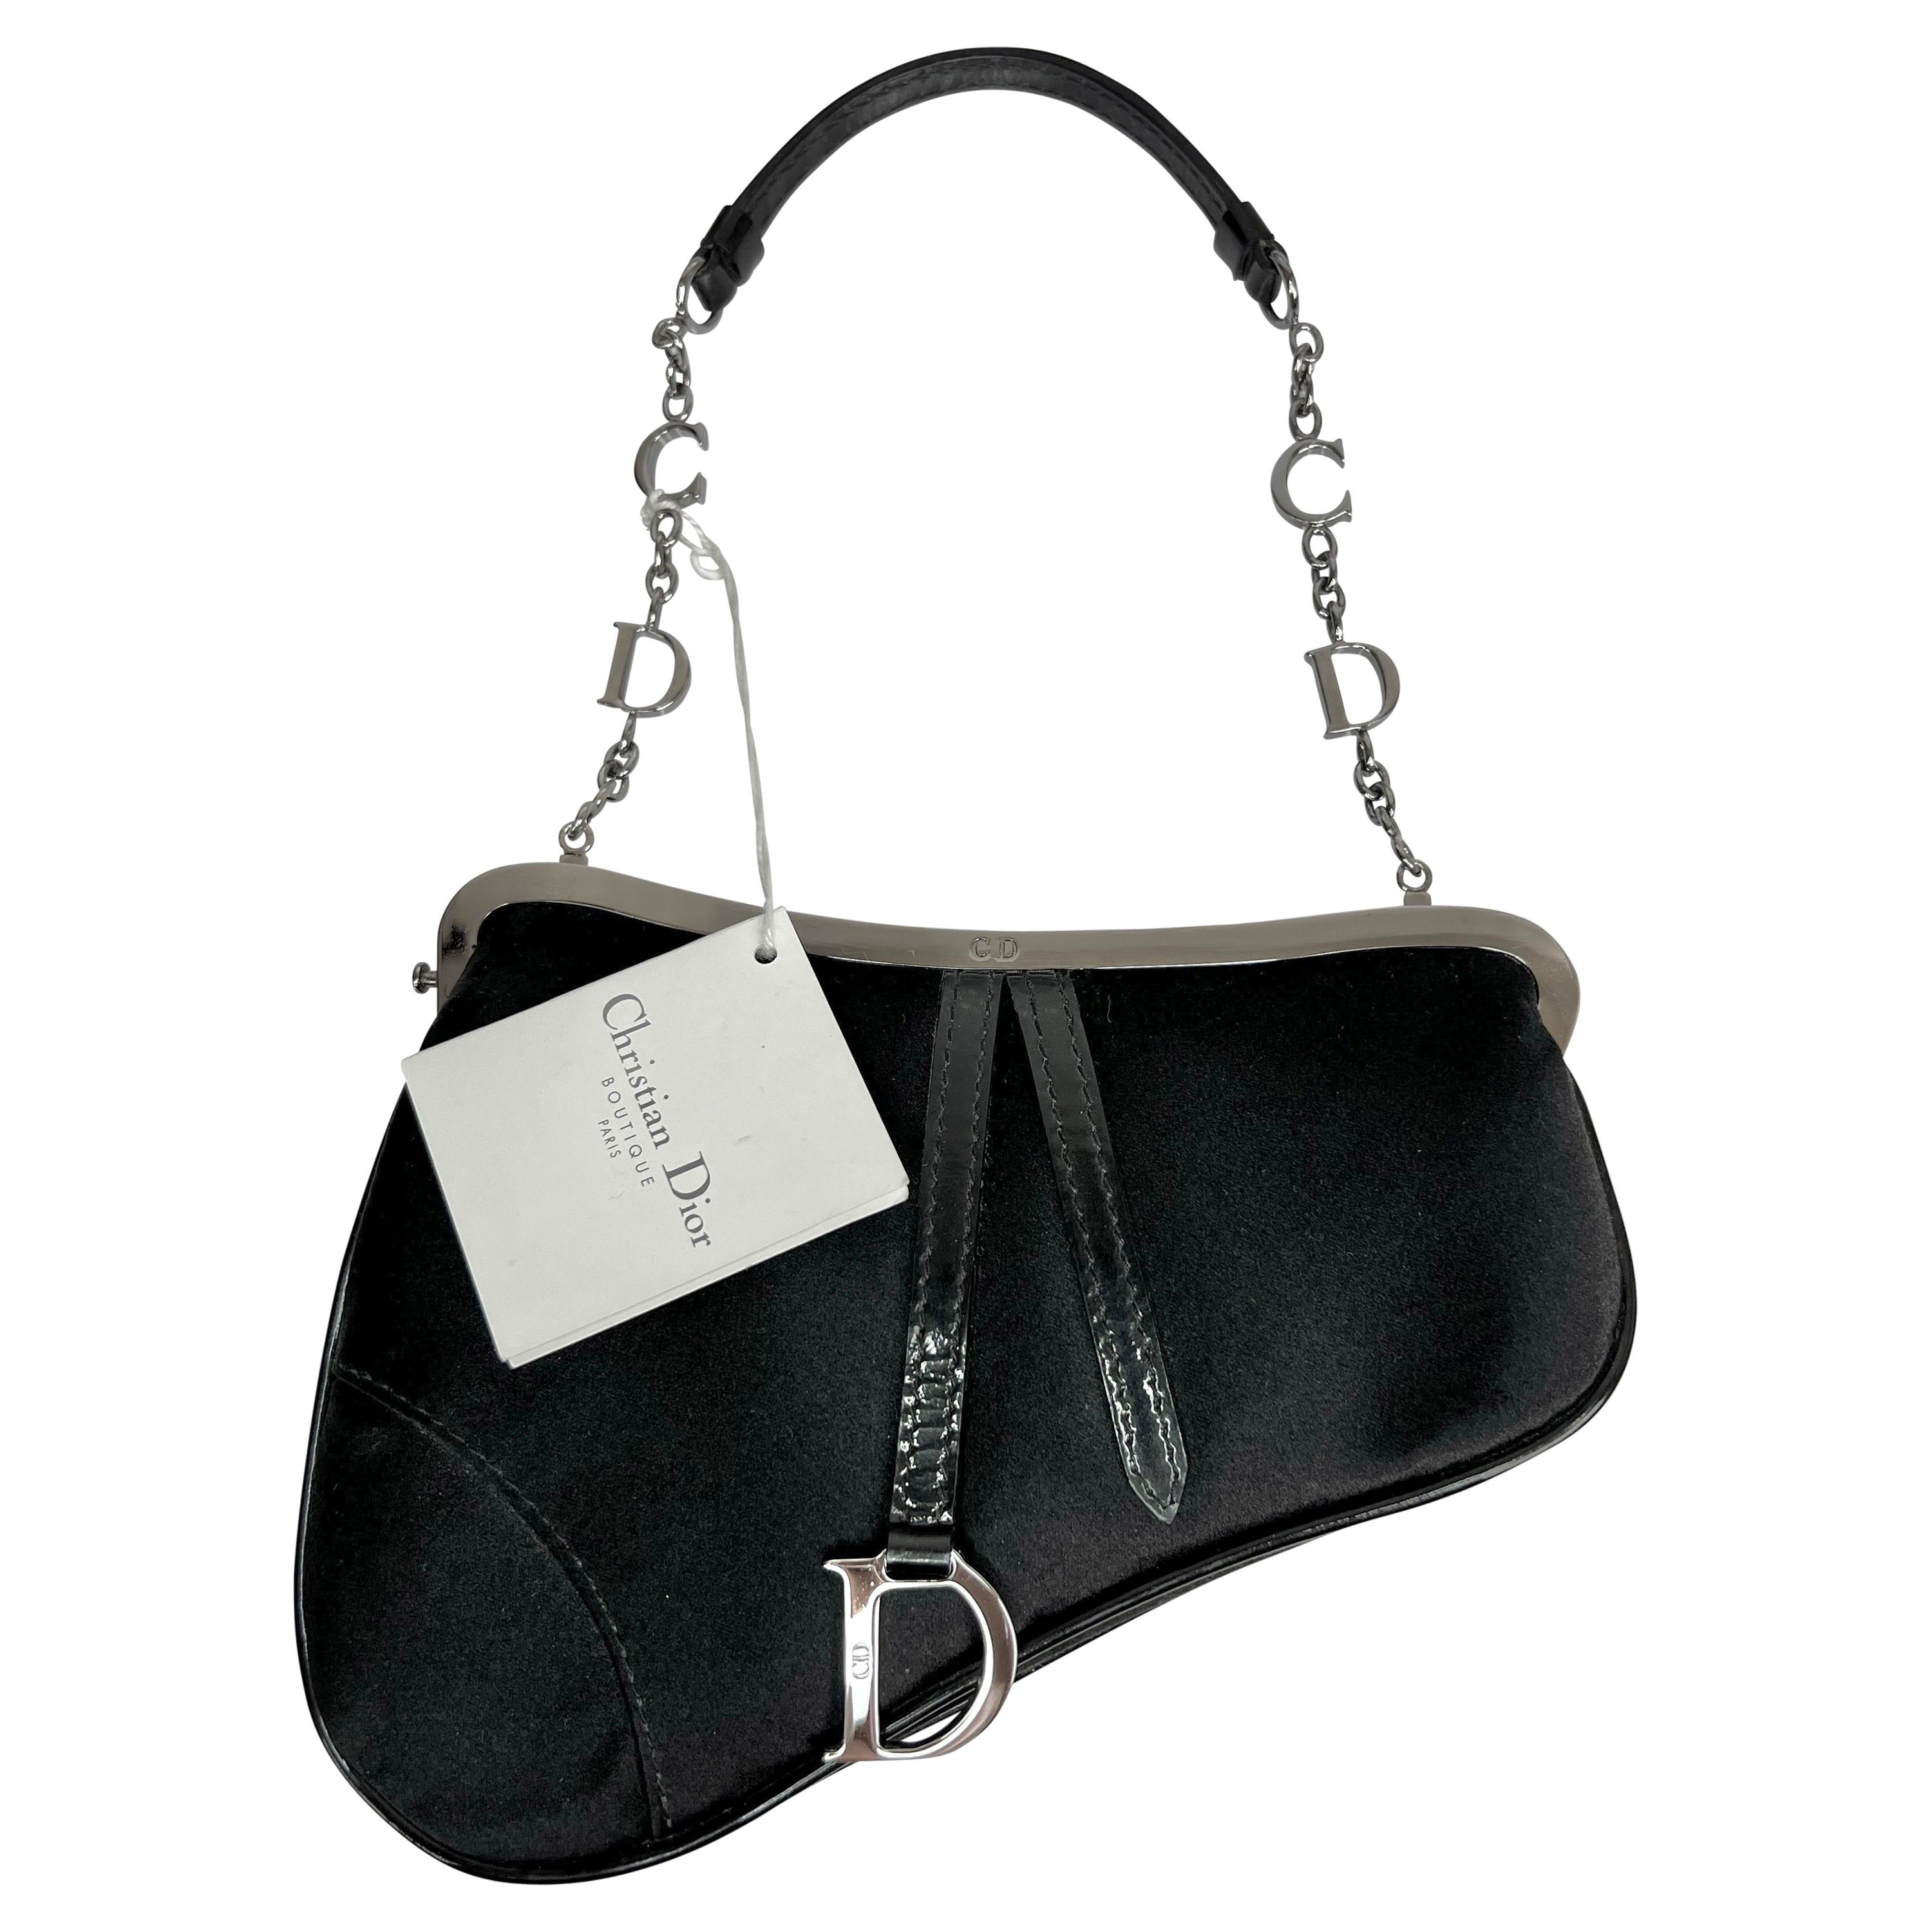 Dior's iconic saddle bag from the noughties is back